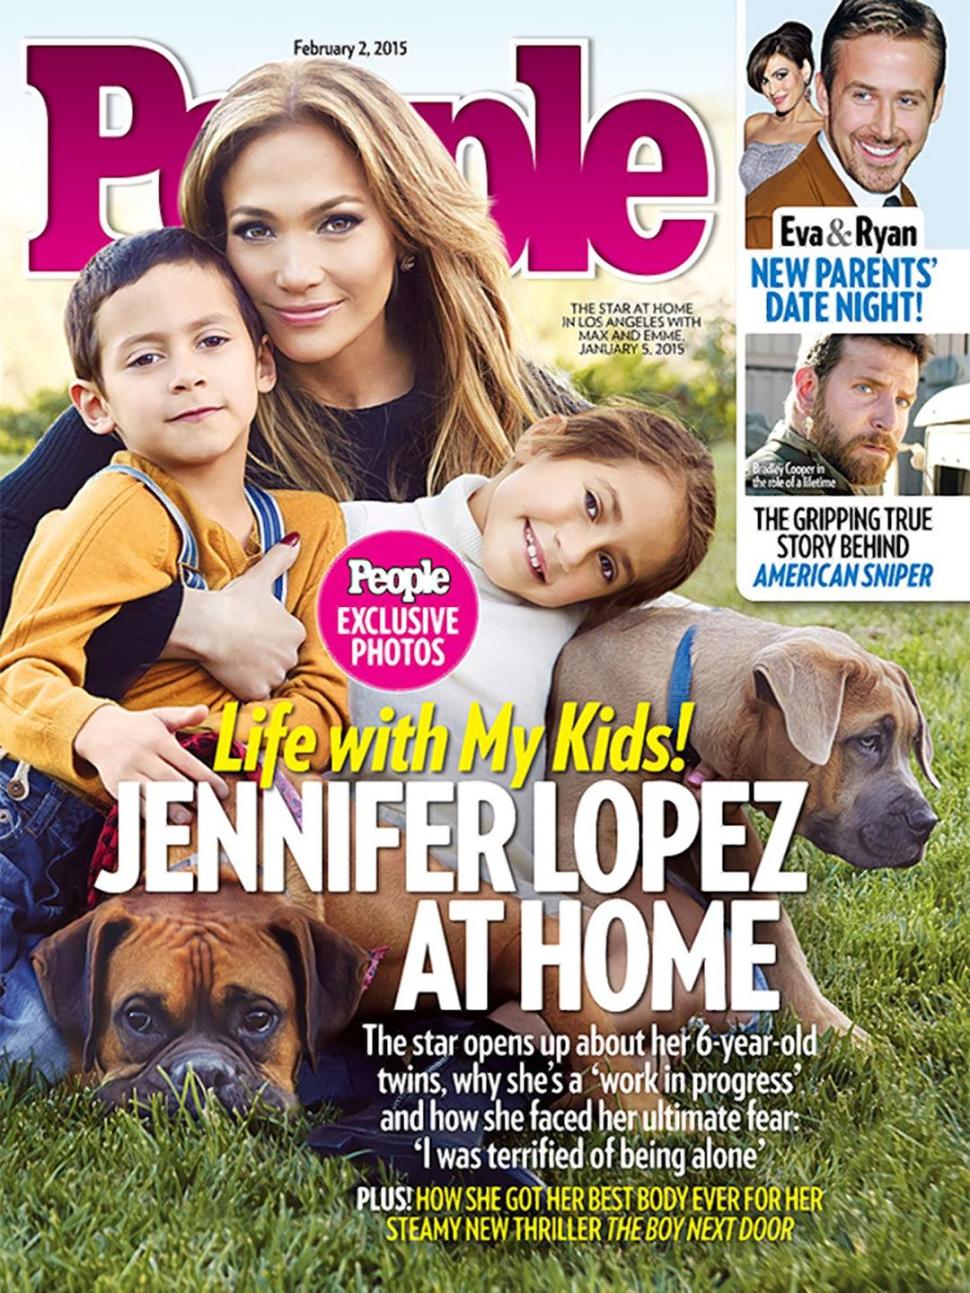 Jennifer Lopez appears with her children, Max and Emme, on the cover of this week's People magazine.